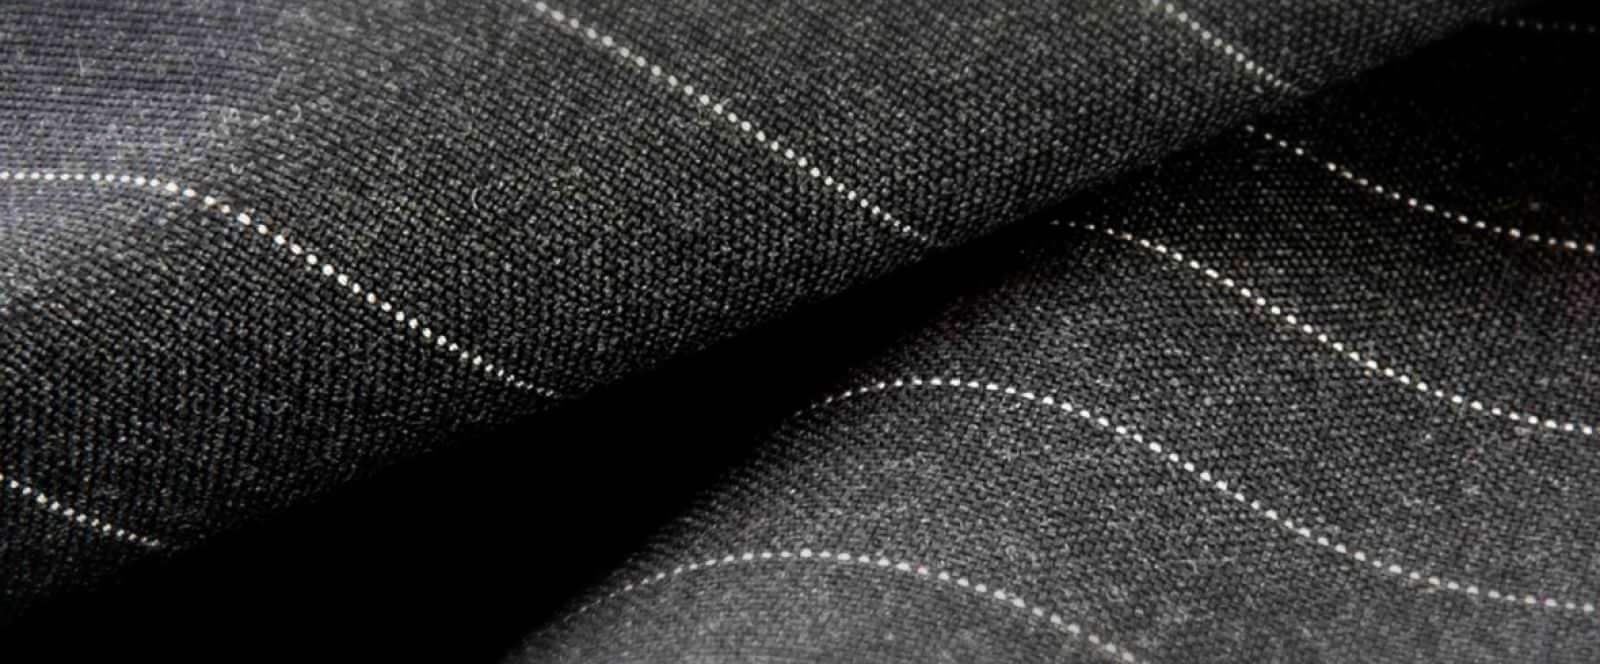 CHOOSING RIGHT FABRIC FOR YOUR YOUR SUIT